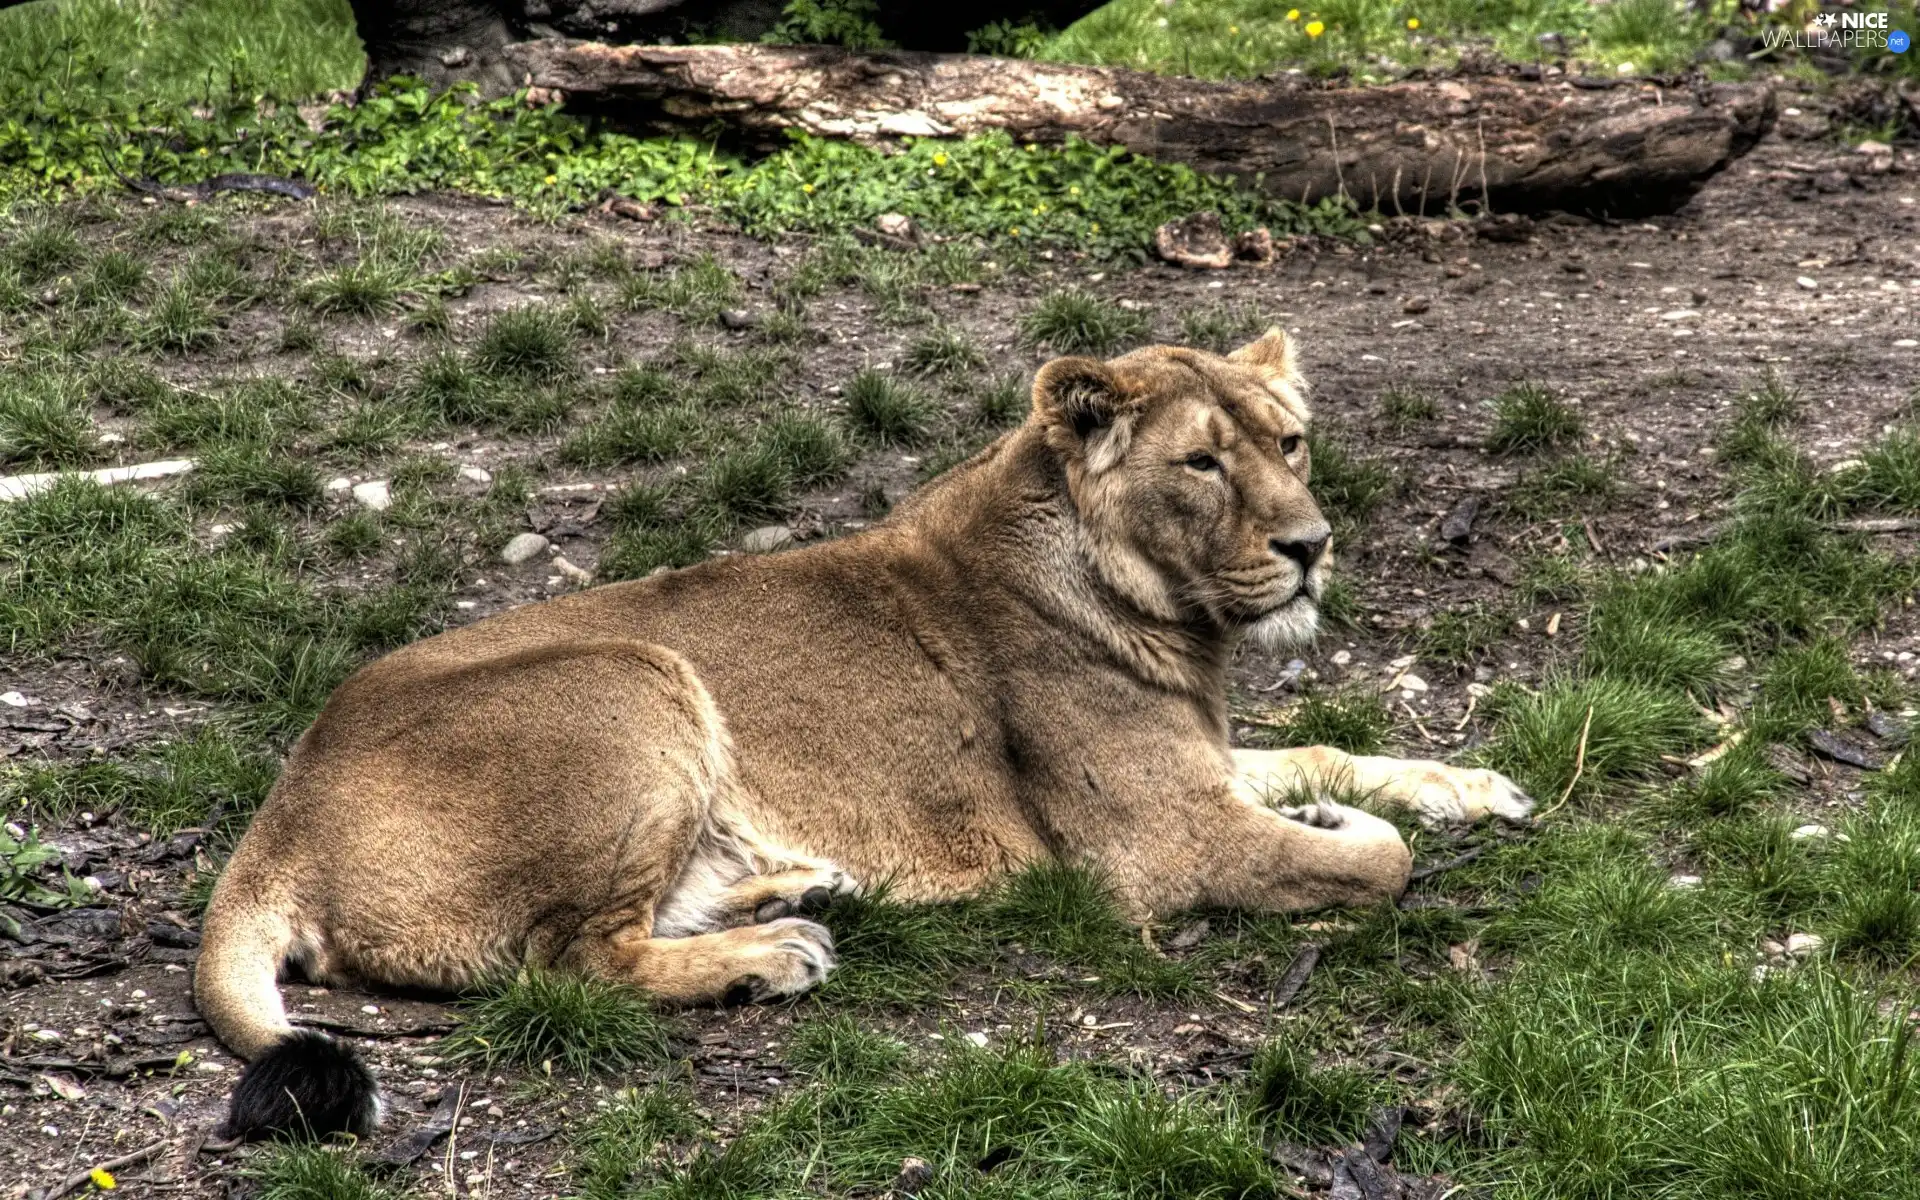 grass, Lod on the beach, Lioness, Clumps, laying